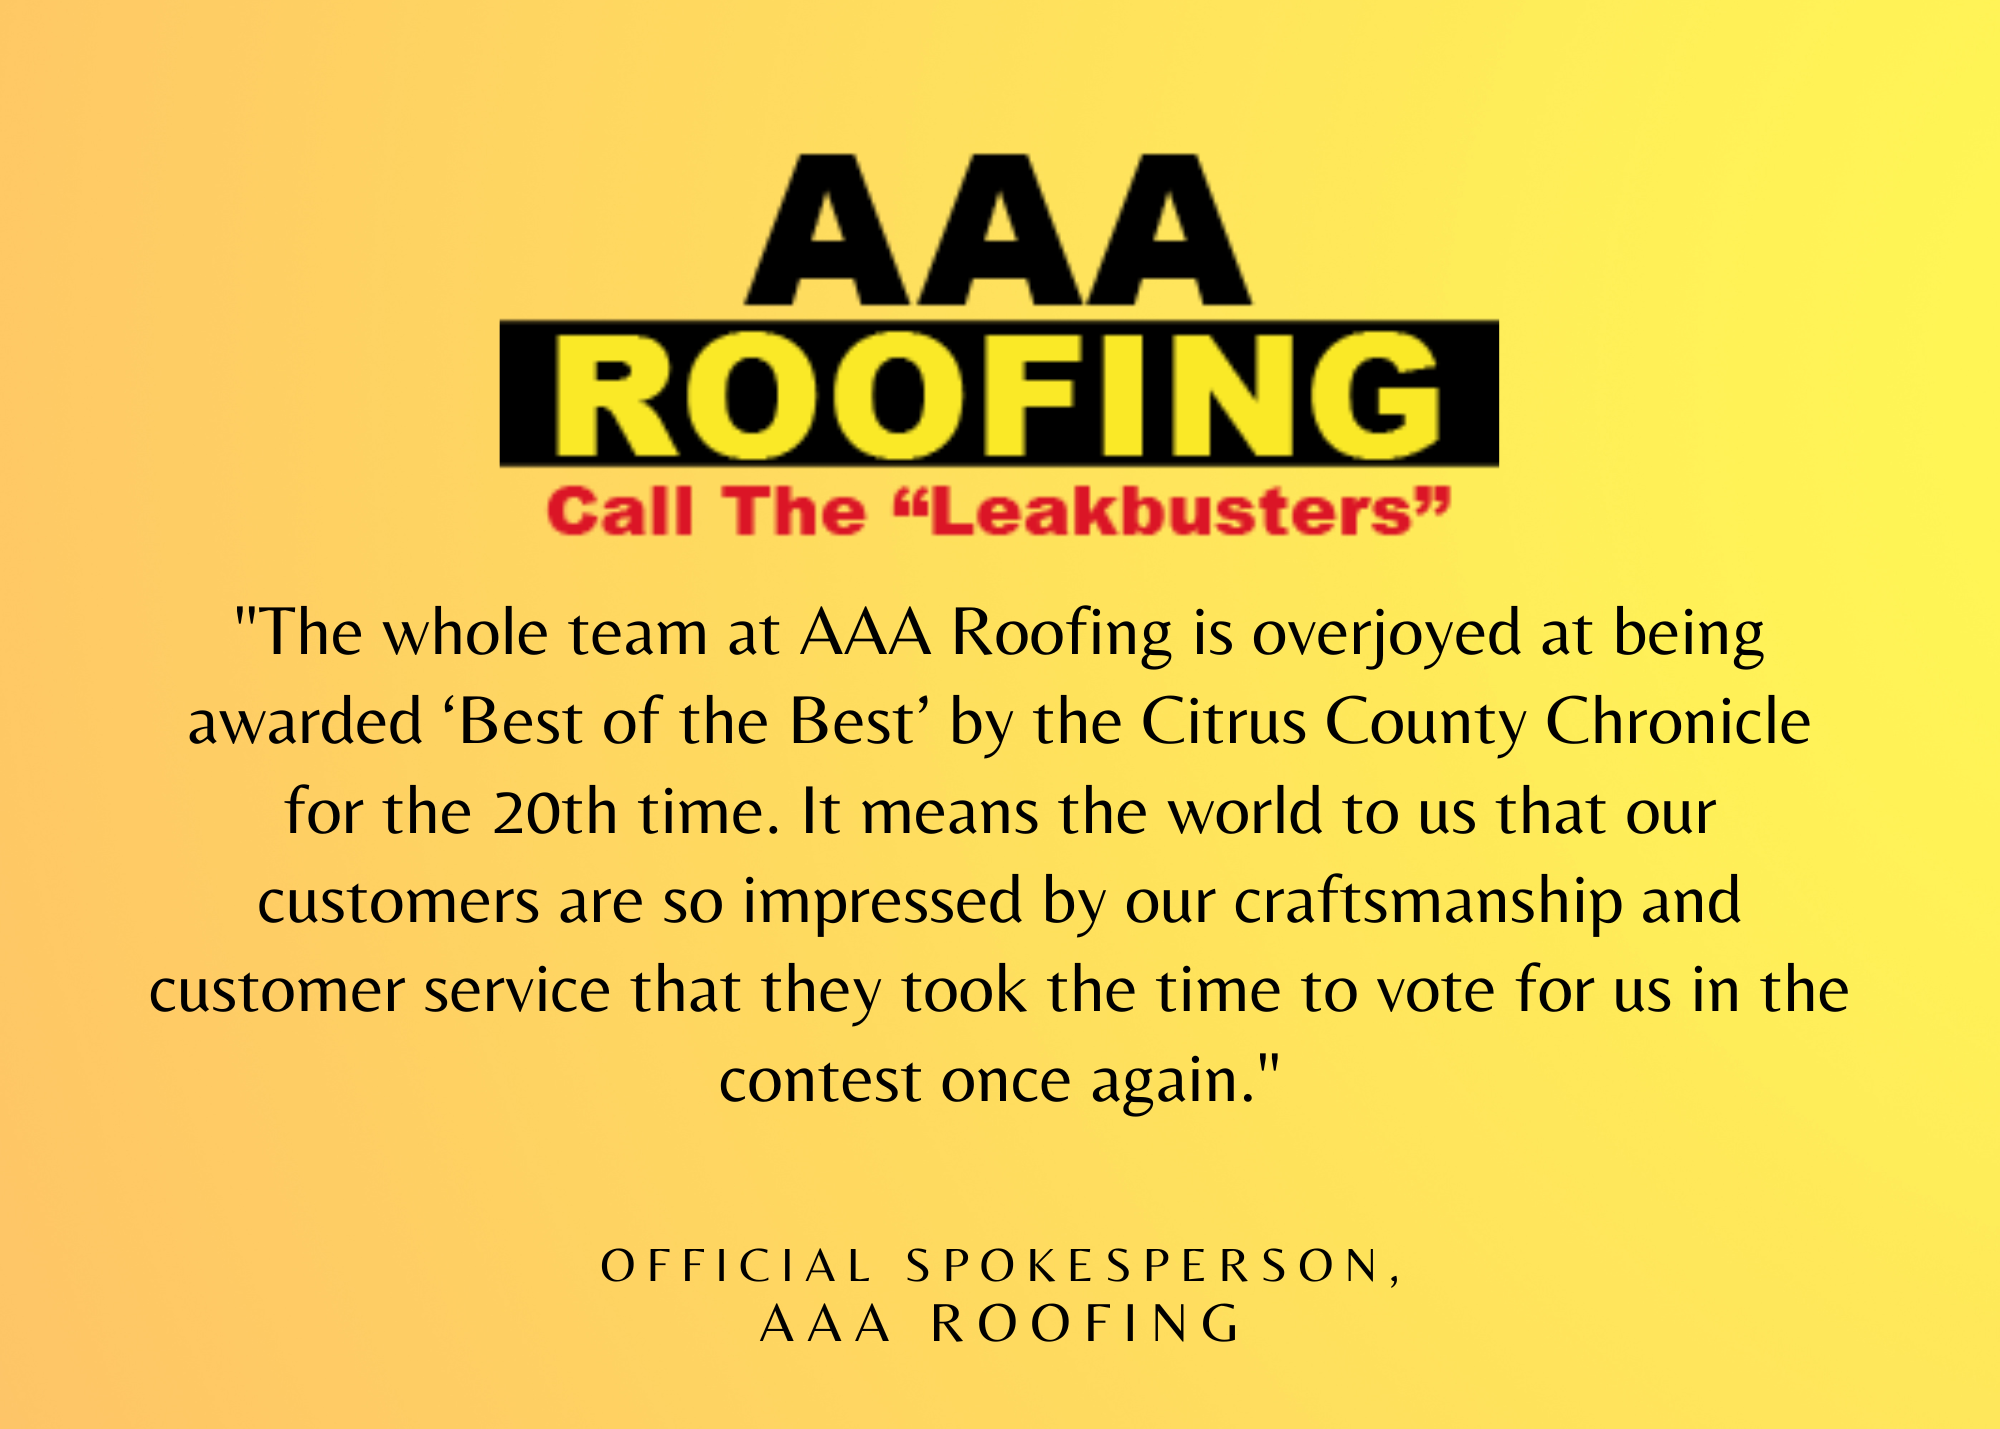 AAA Roofing, Monday, November 28, 2022, Press release picture